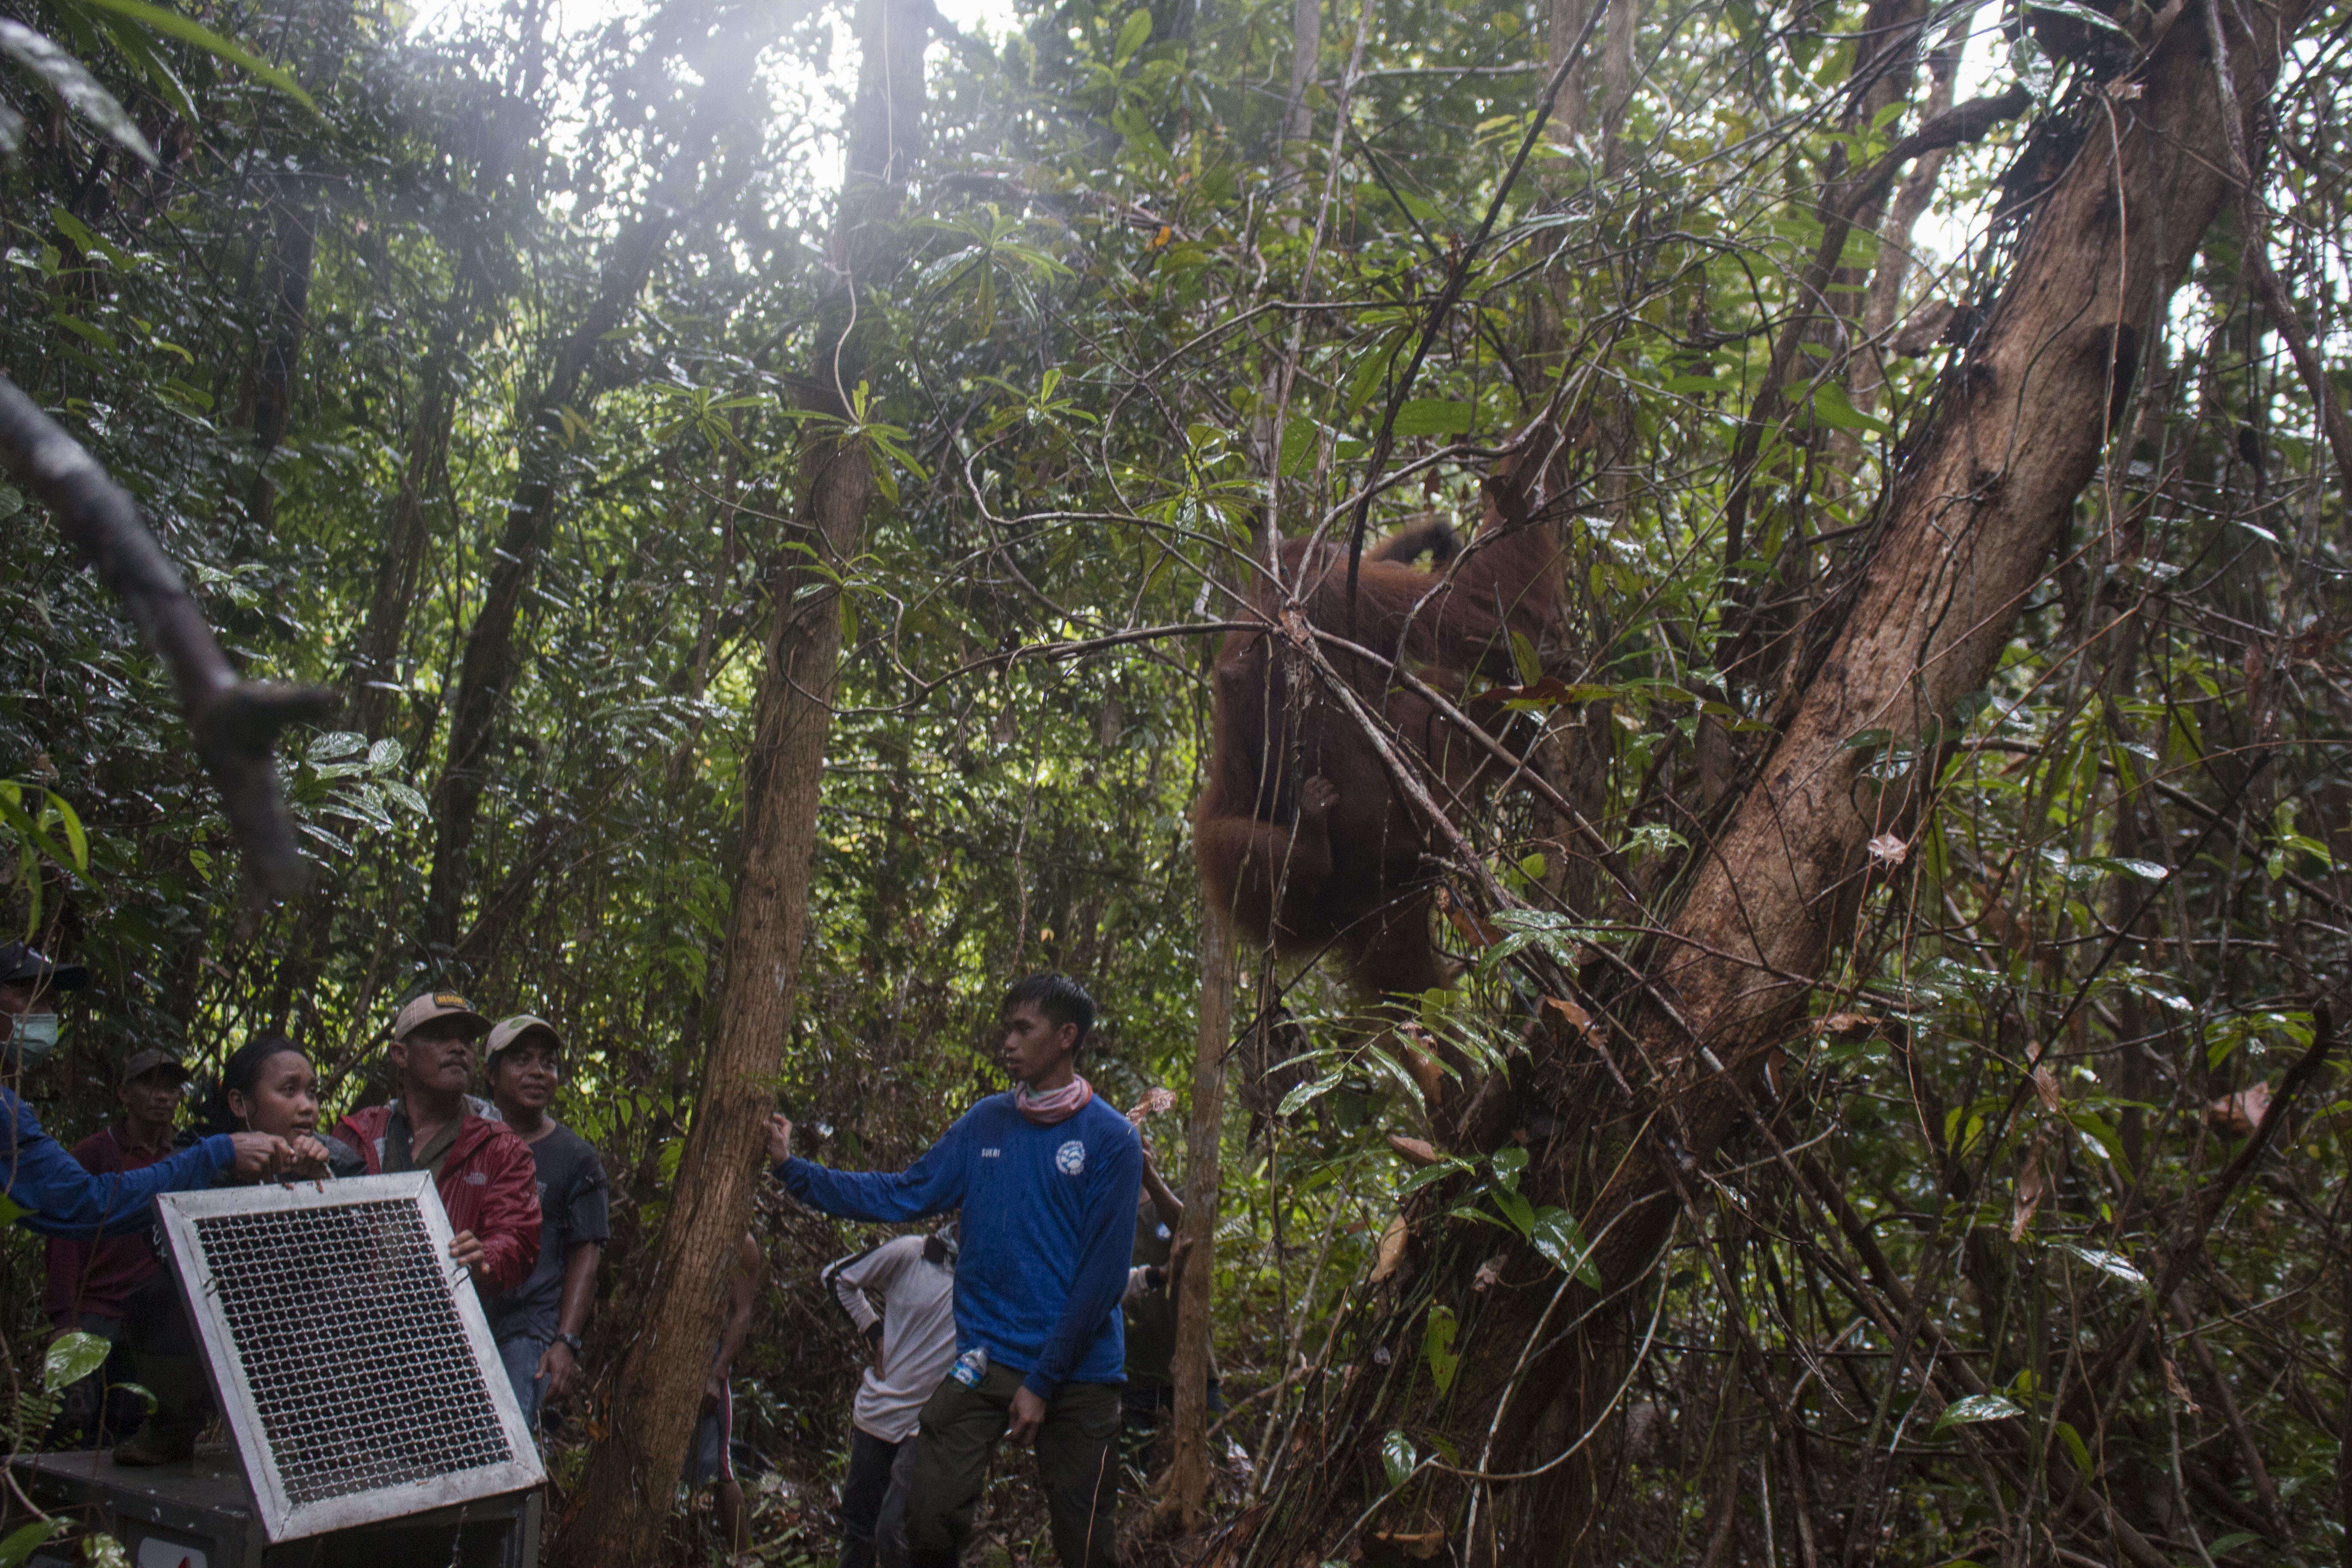 Mother and baby orangutan going into the forest